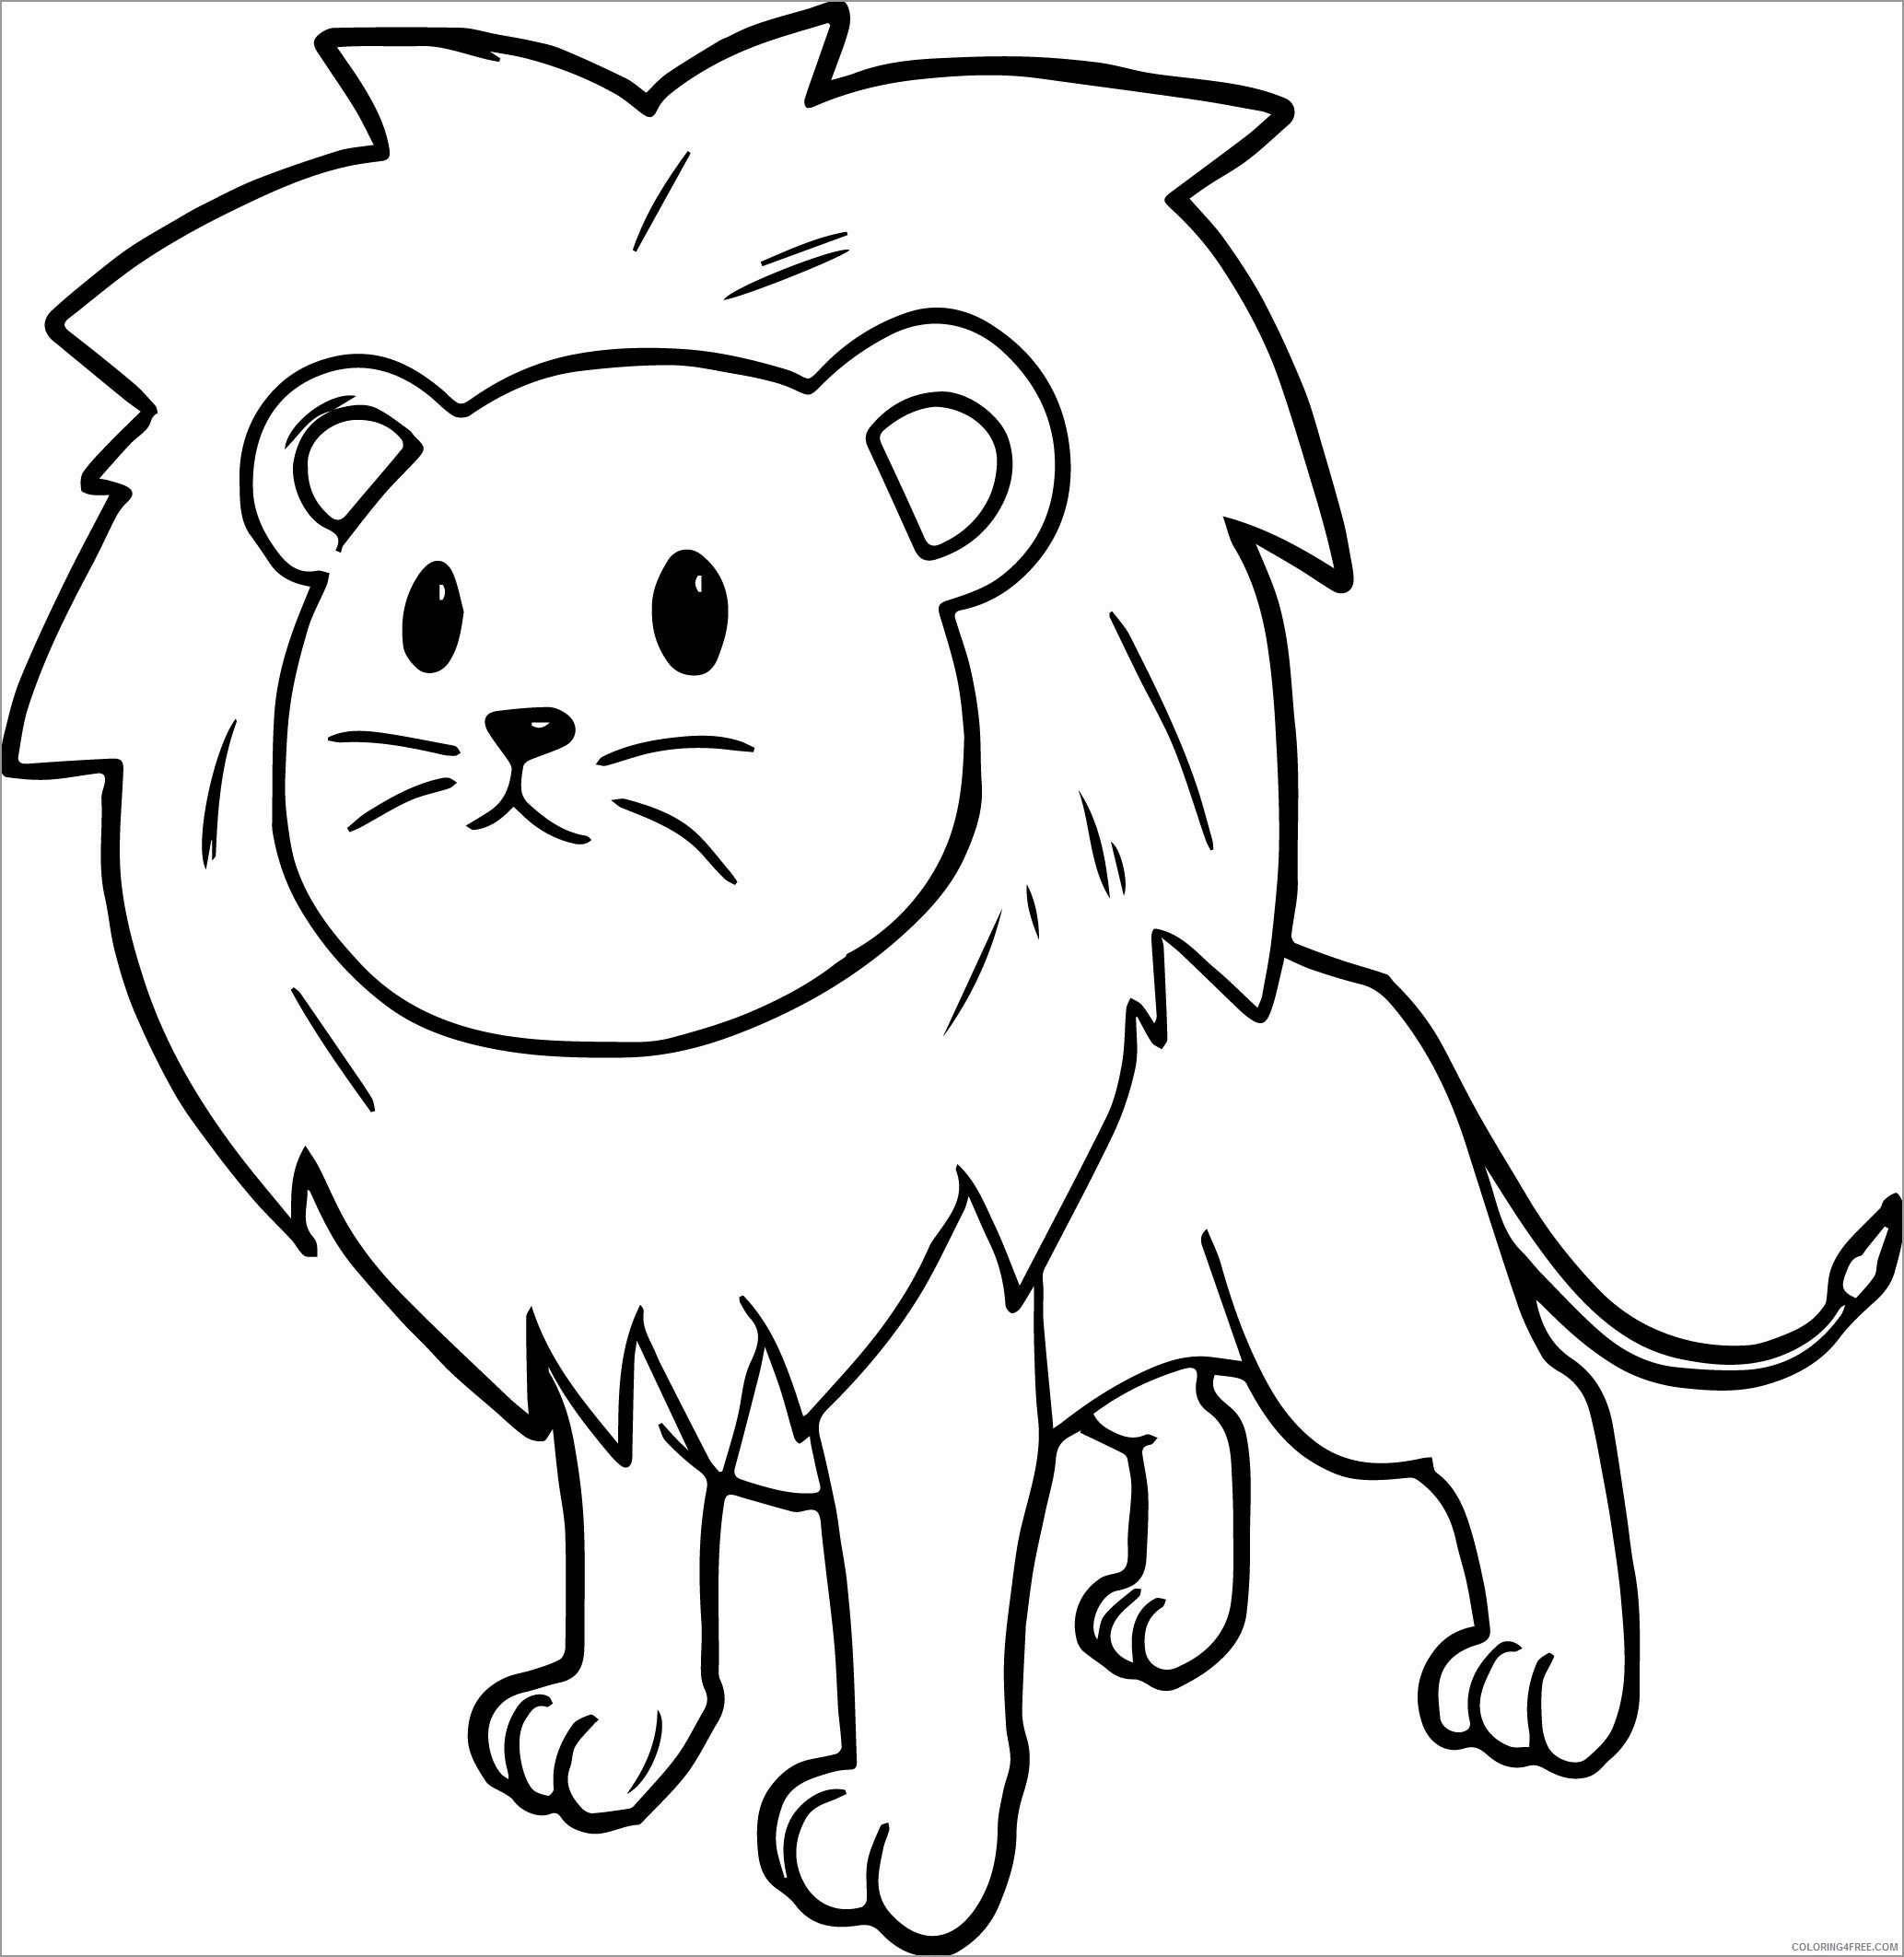 Preschool Animal Coloring Pages lion for preschoolers Printable 2021 4862 Coloring4free